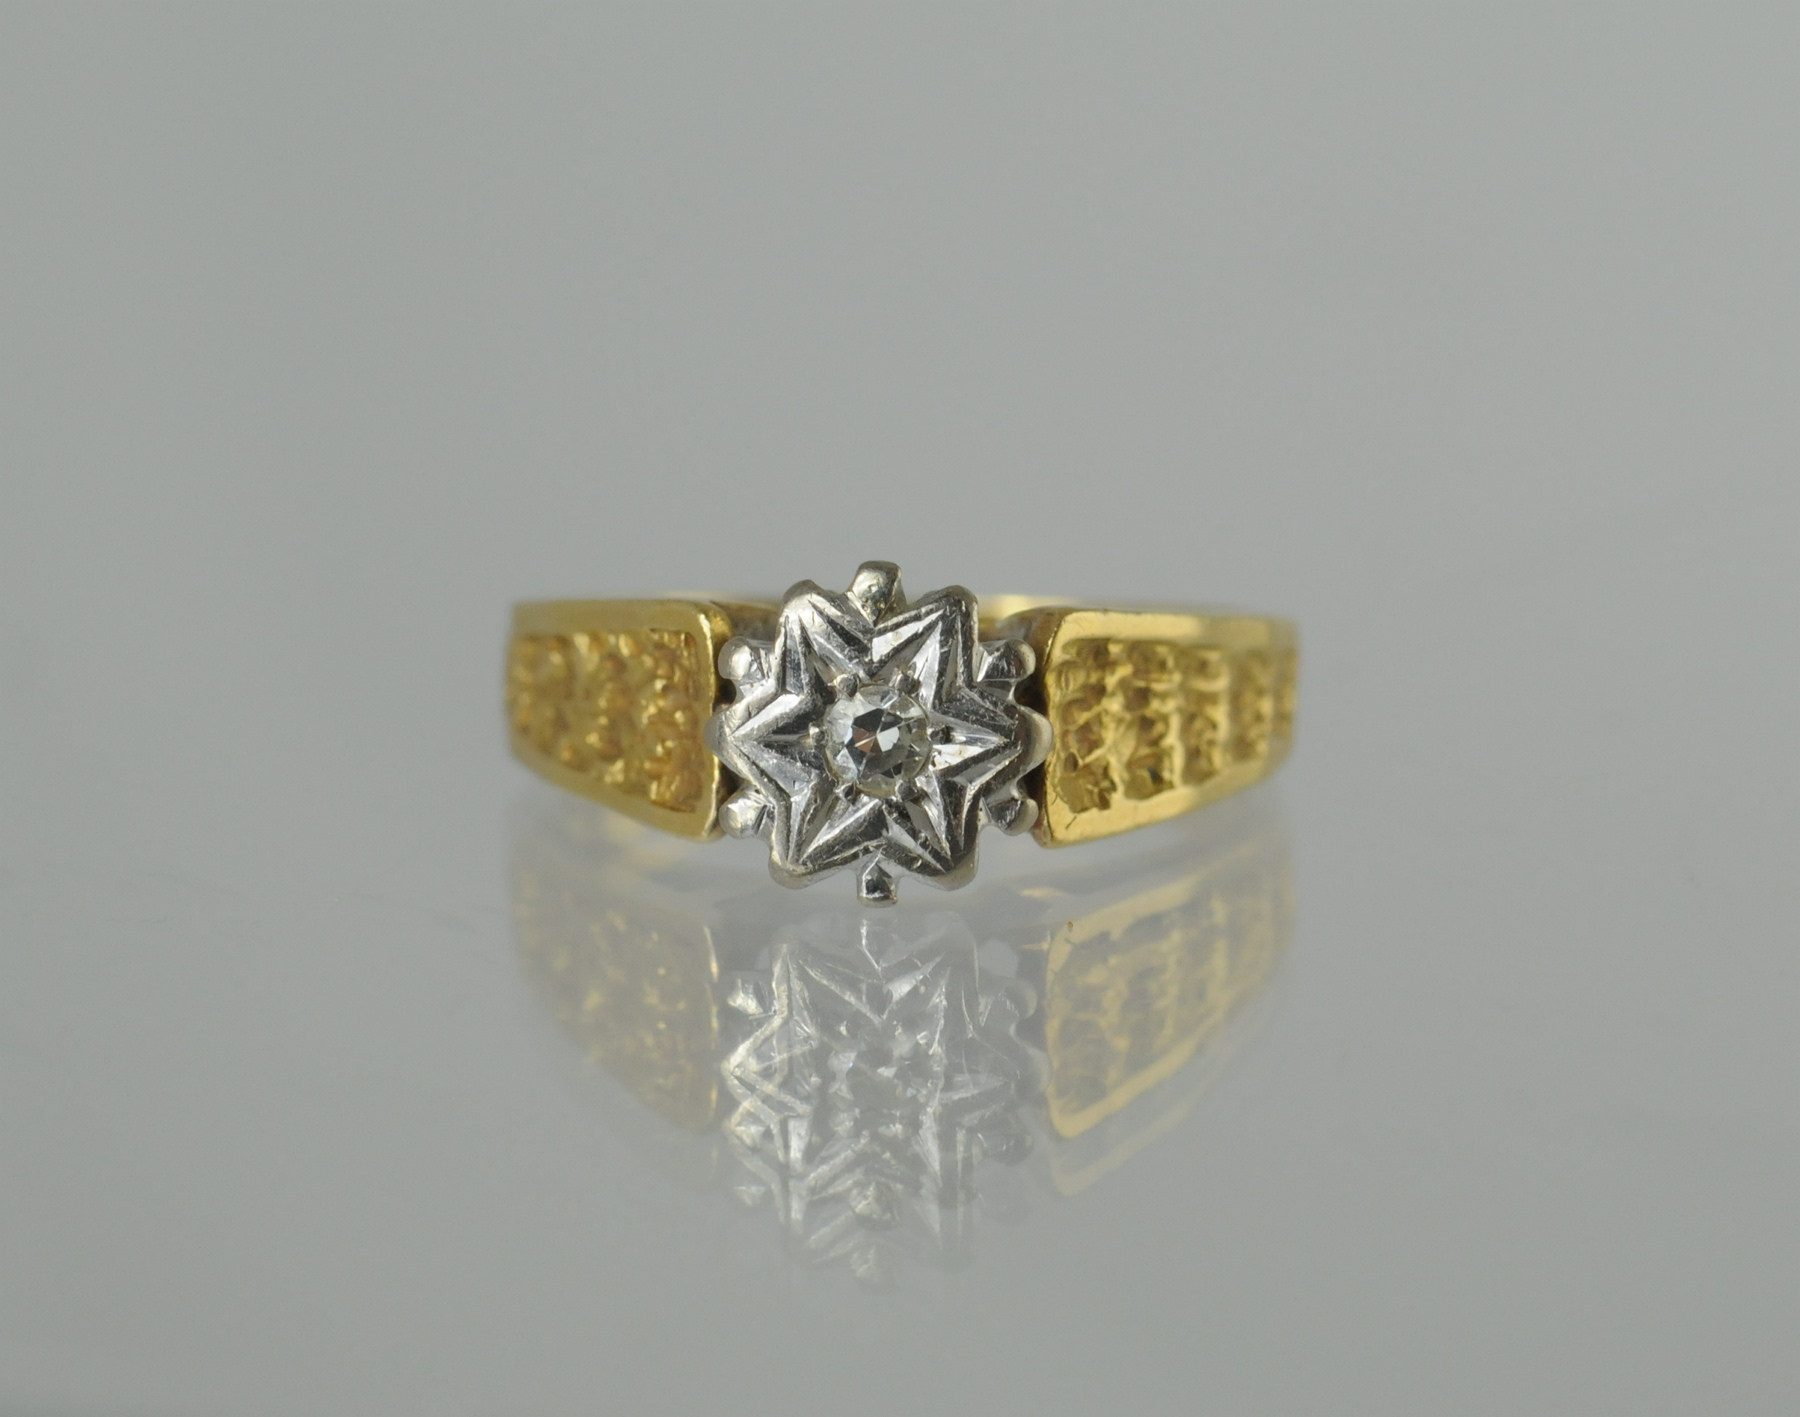 Diamond solitaire ring with textured sho